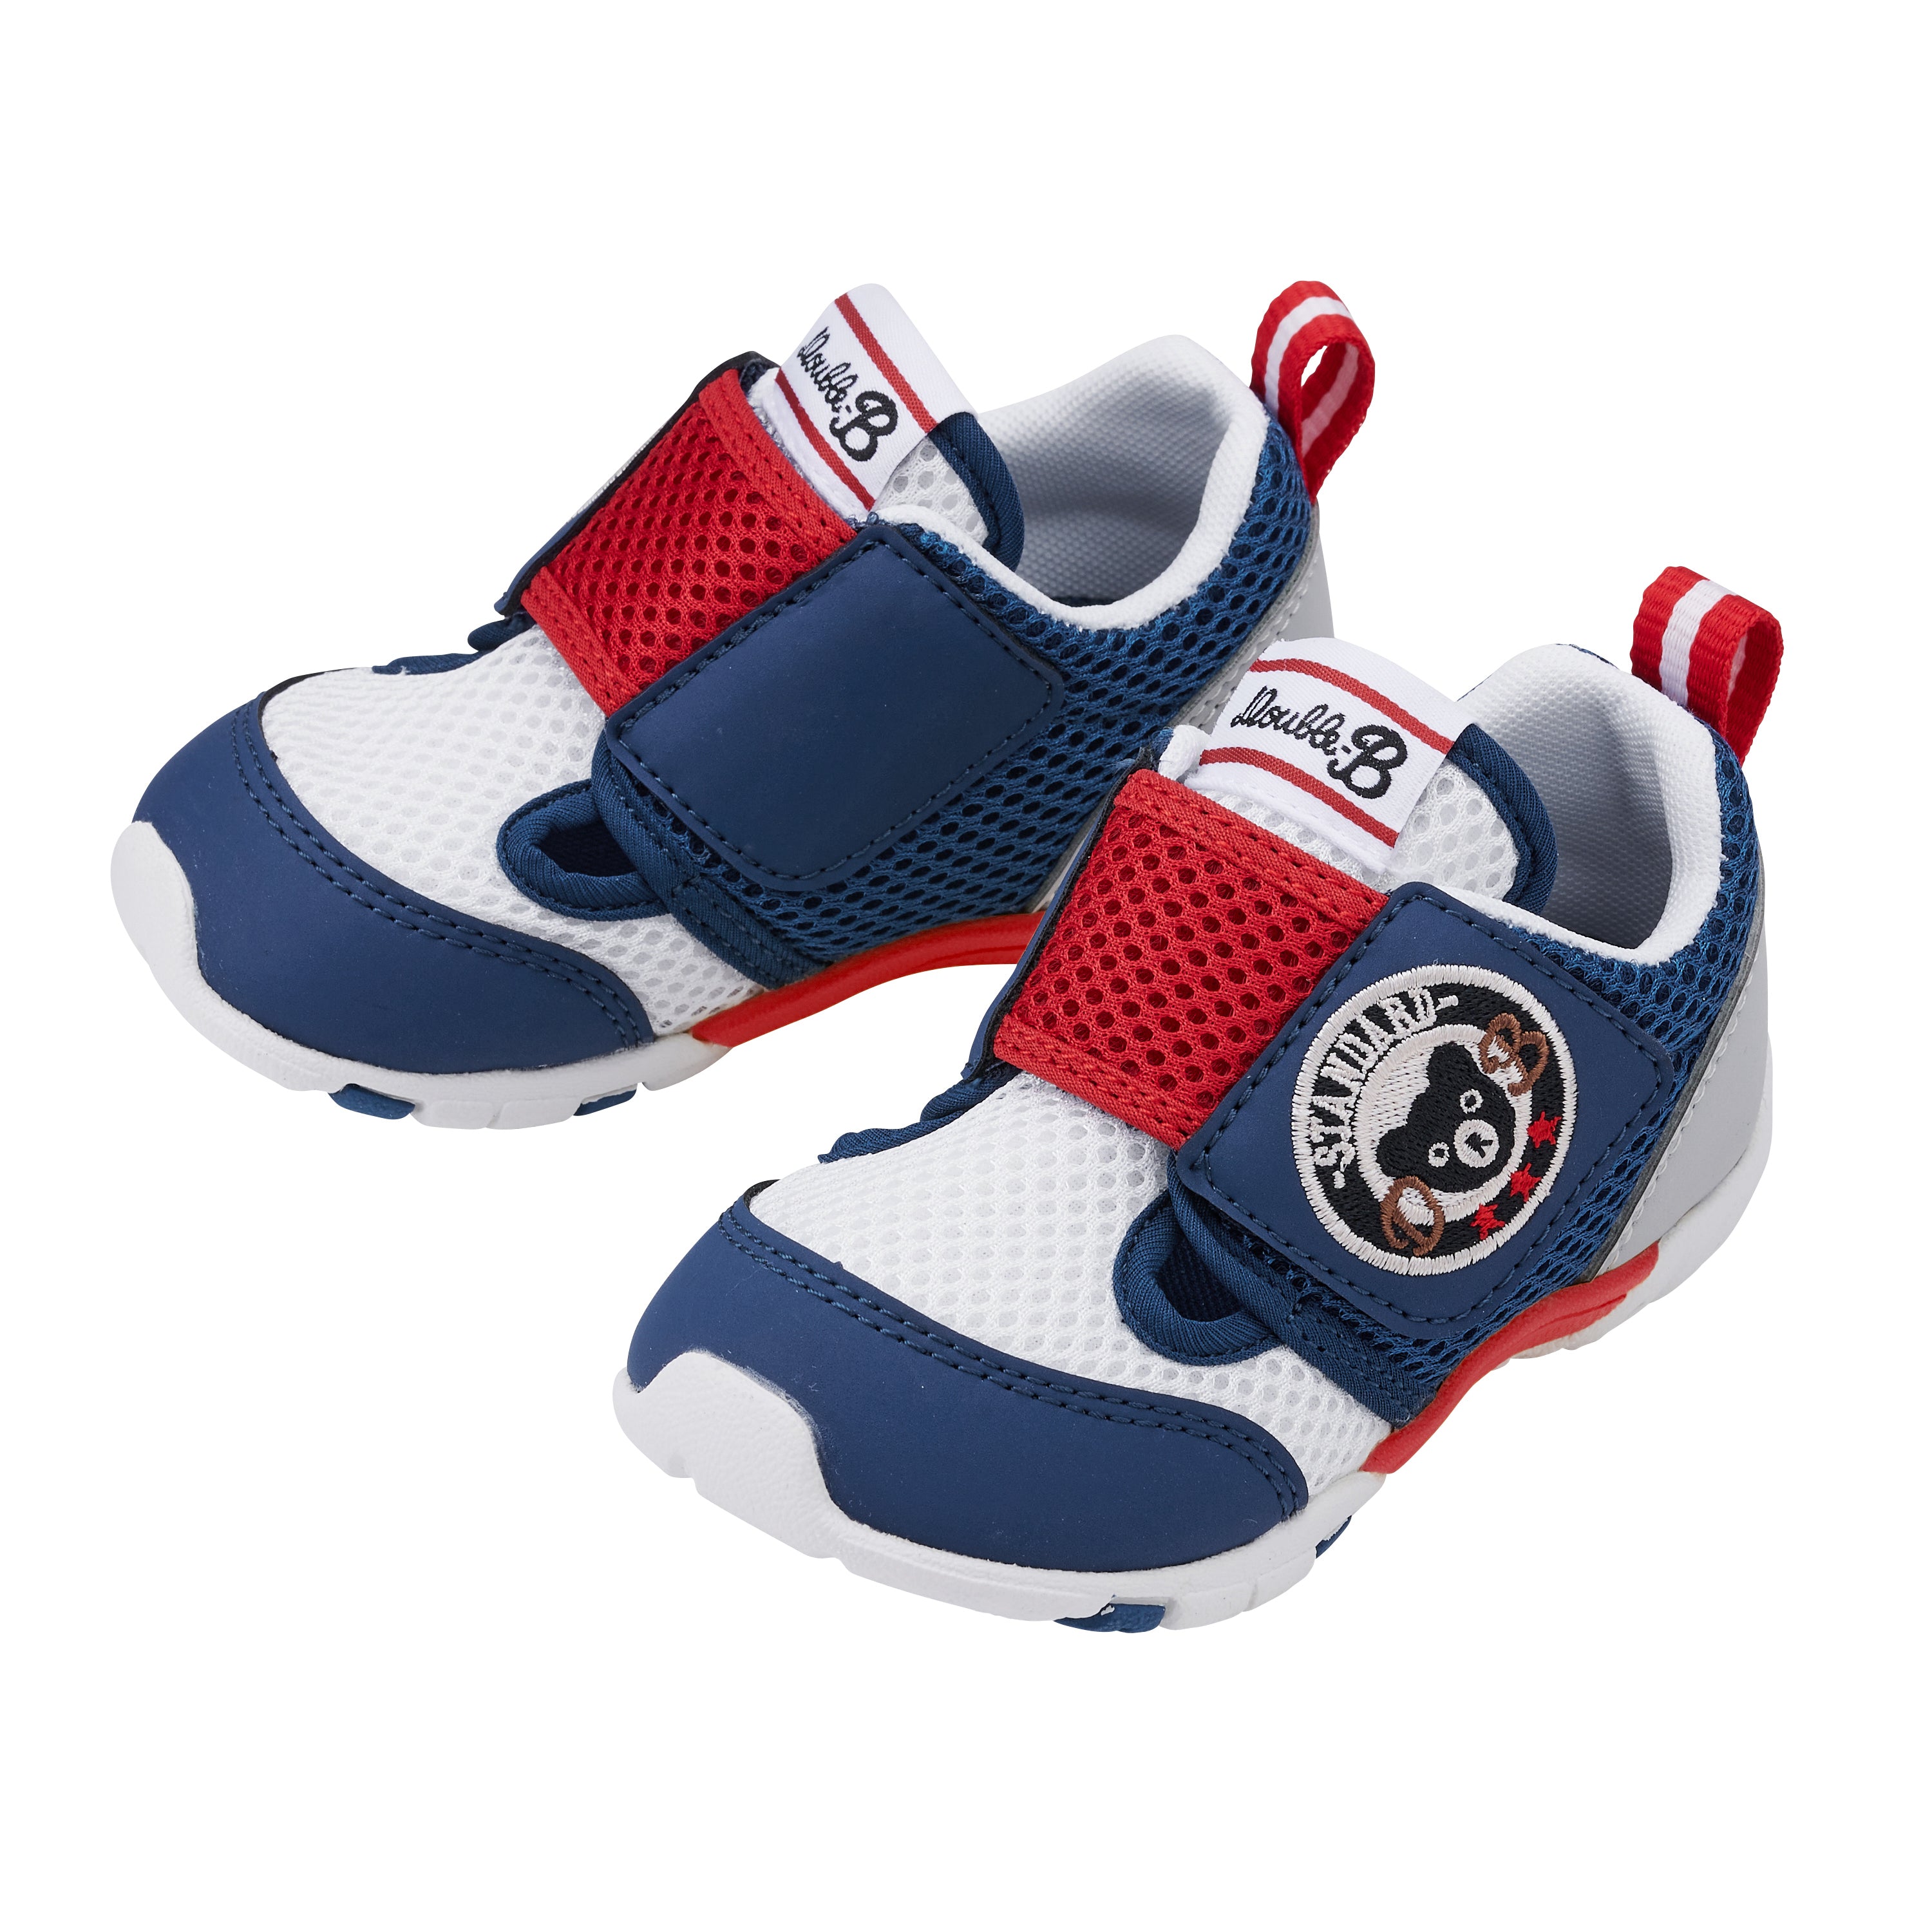 Double Russell second baby shoes | MIKI HOUSE OFFICIAL SITE